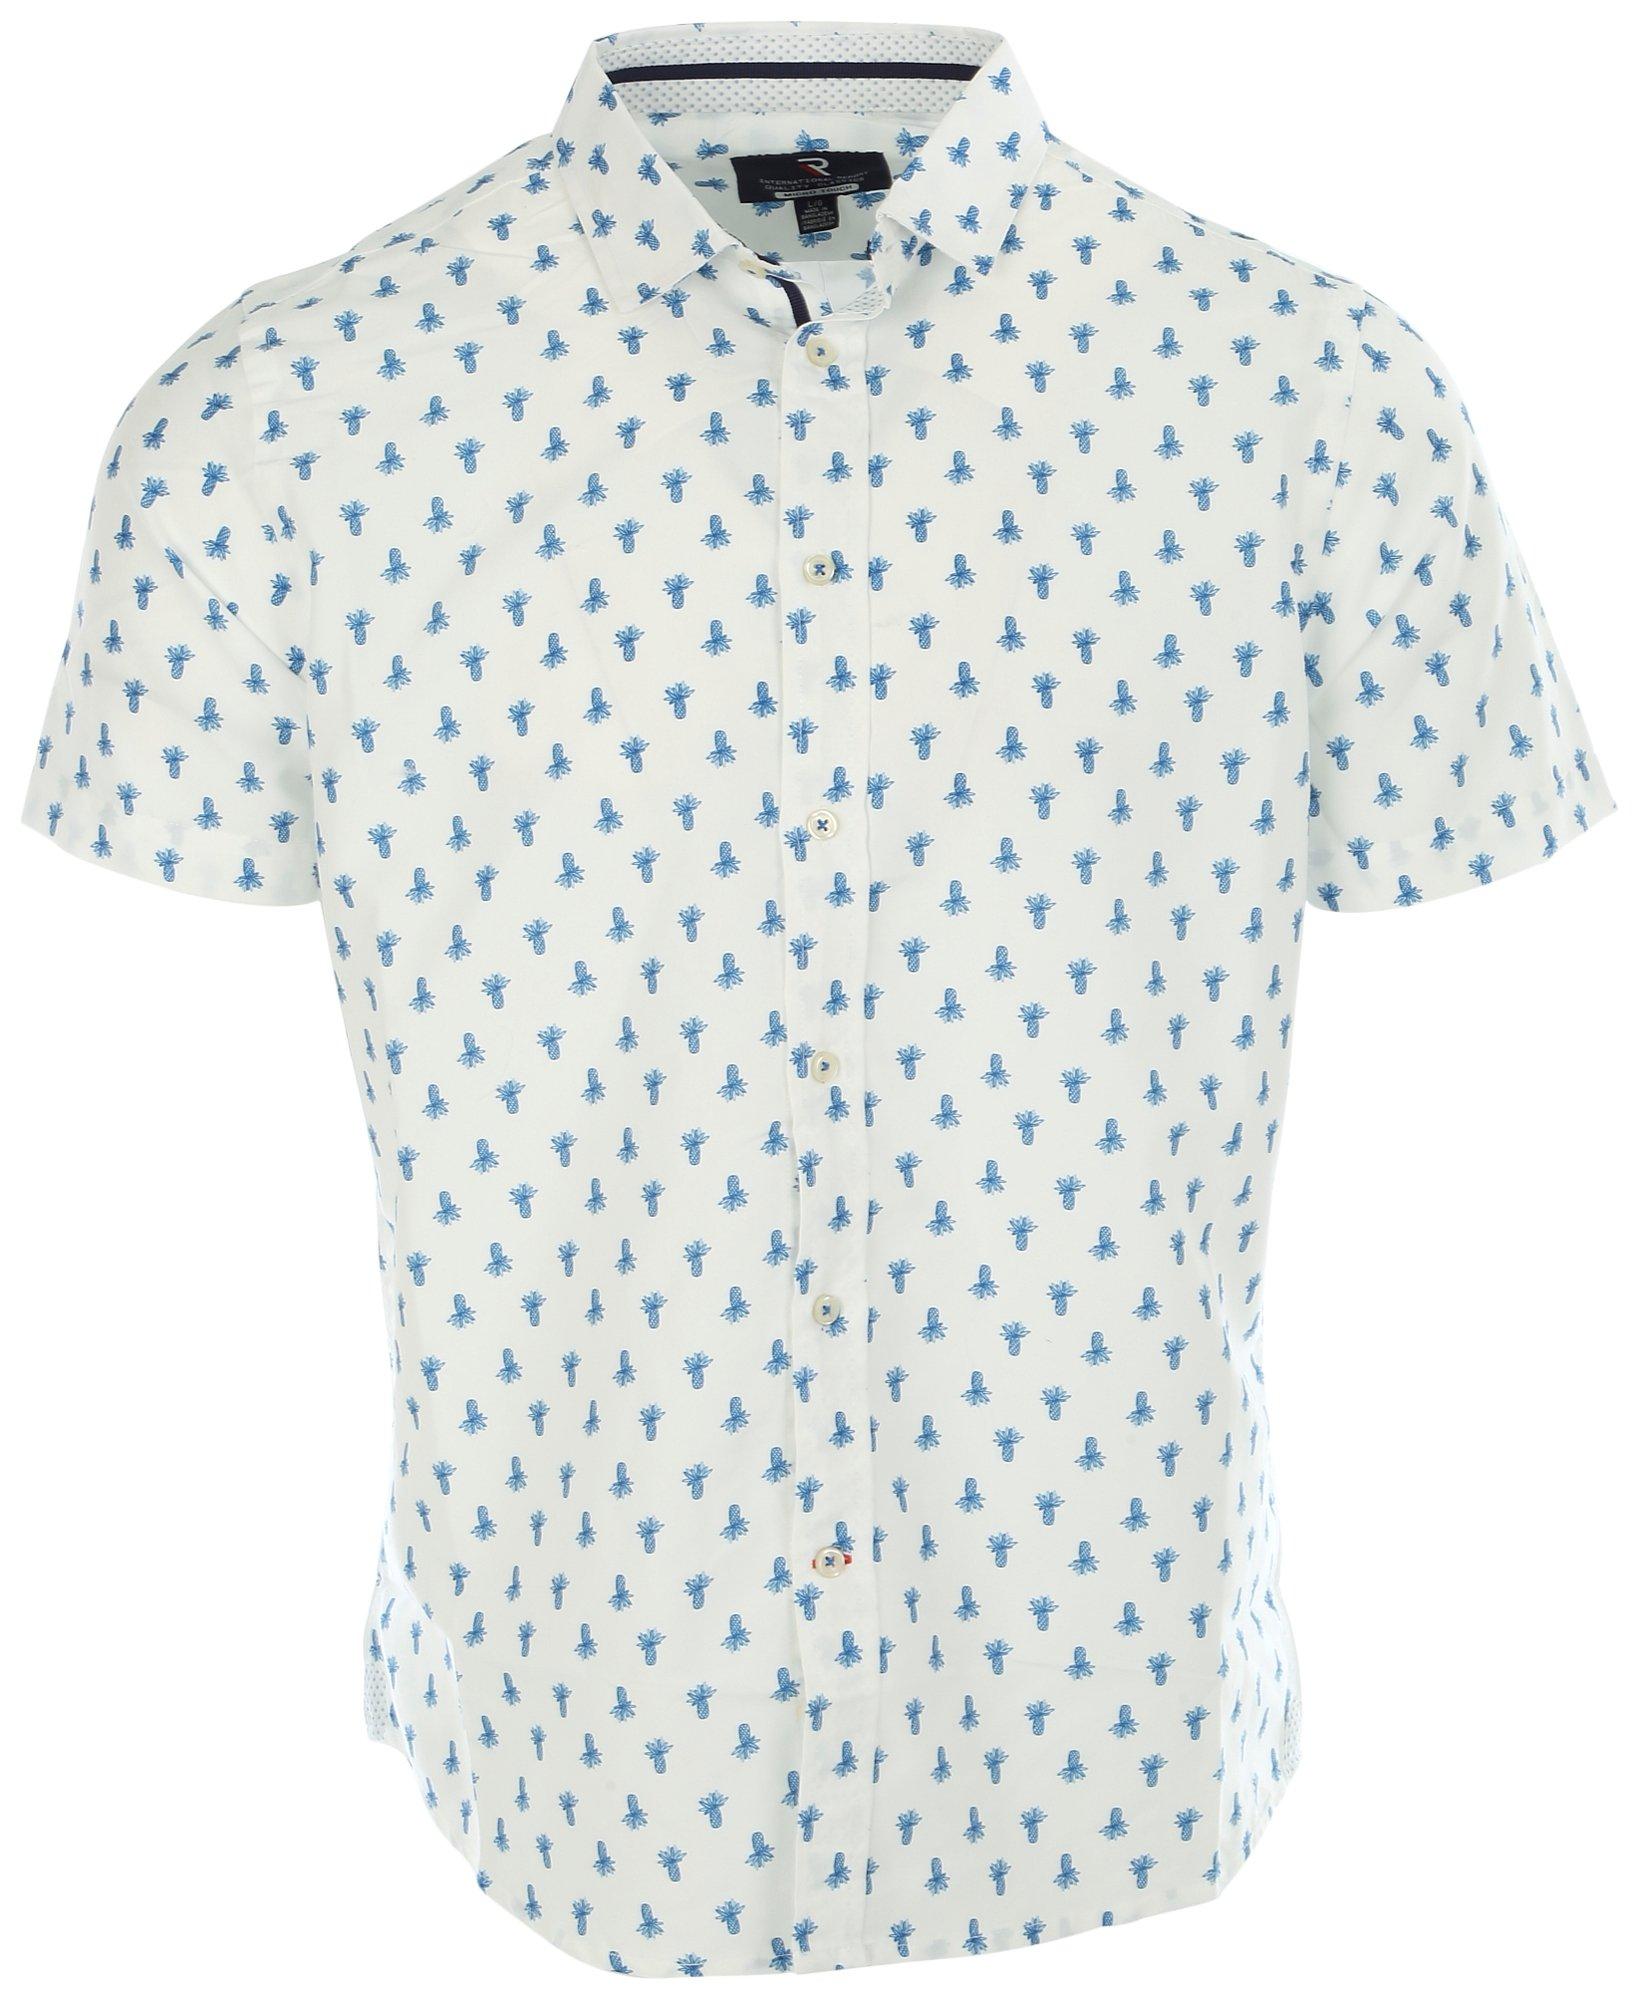 Mens Micro Touch Pineapple Button-Up Short Sleeve Shirt